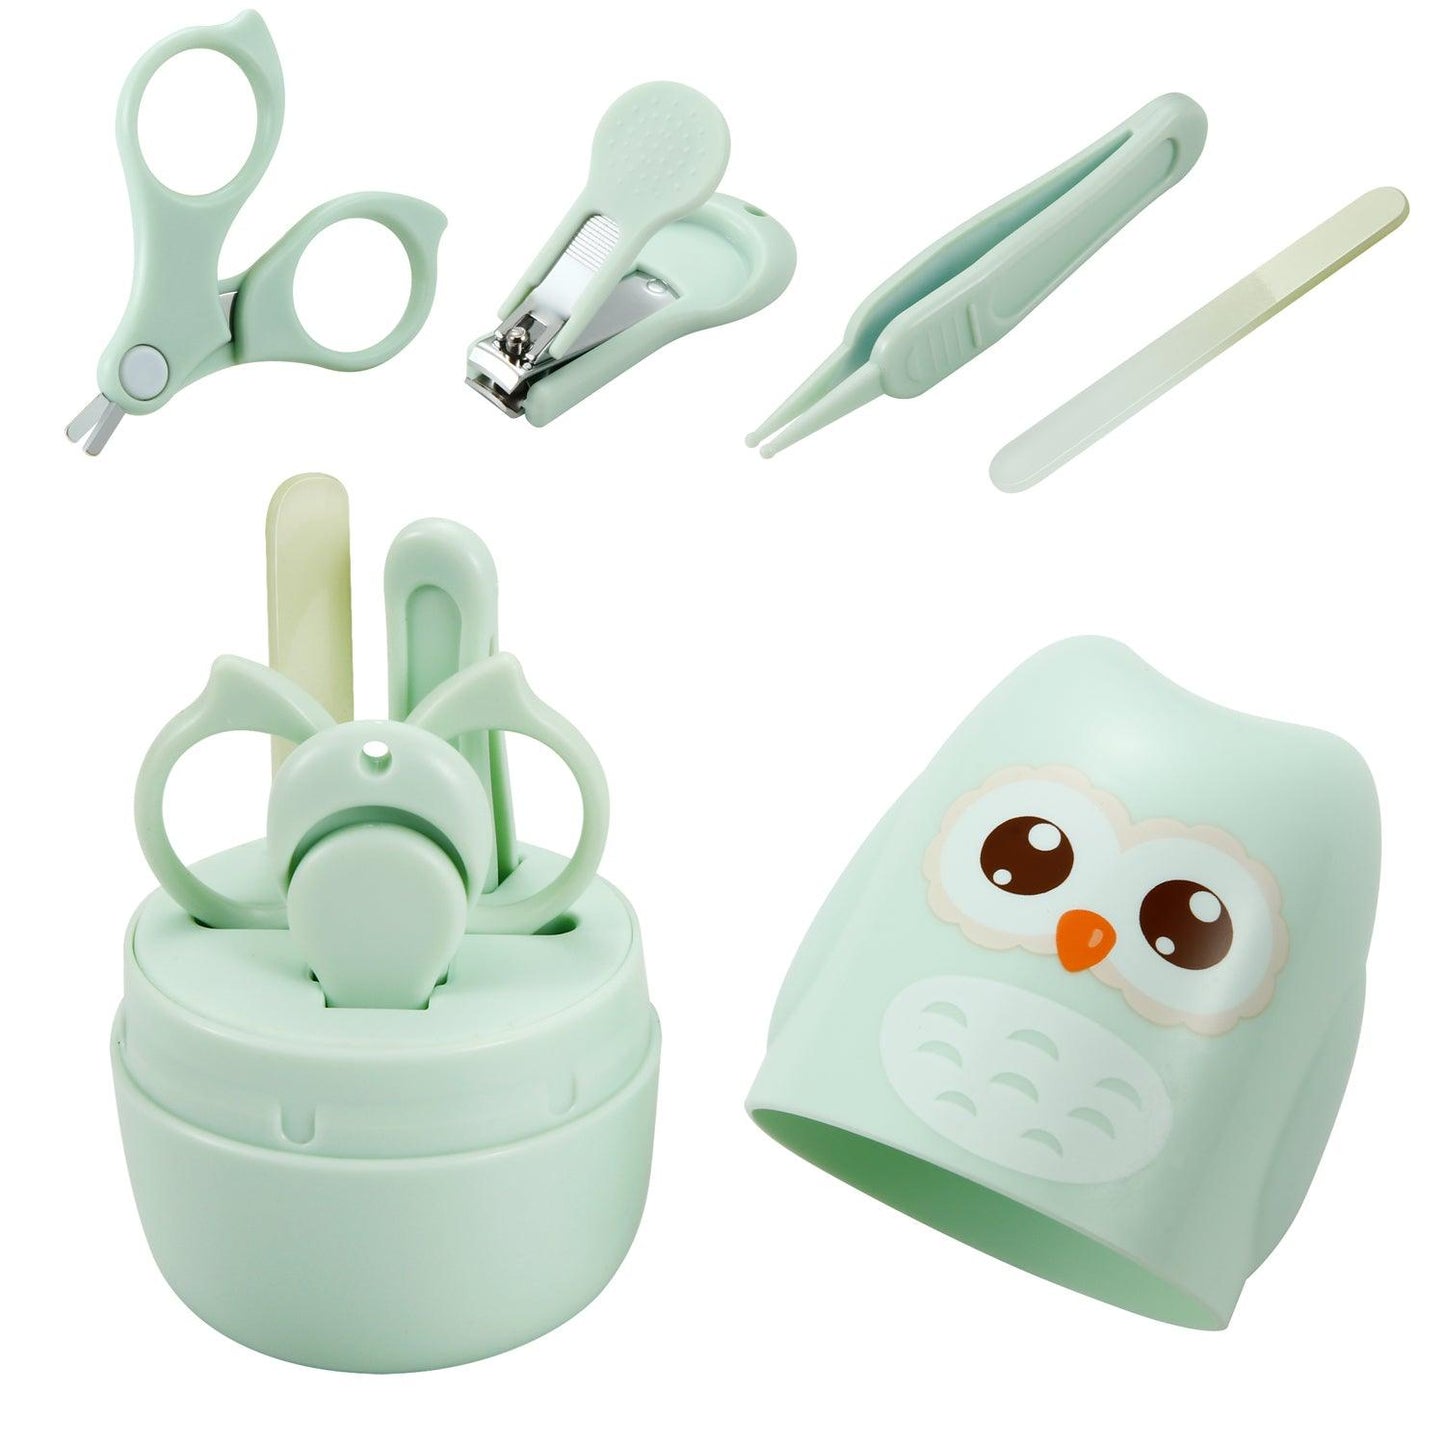 Baby Nail Grooming Care Kit | 4-in-1 Set with Clippers, Scissors, File, and Tweezers - PandaEar